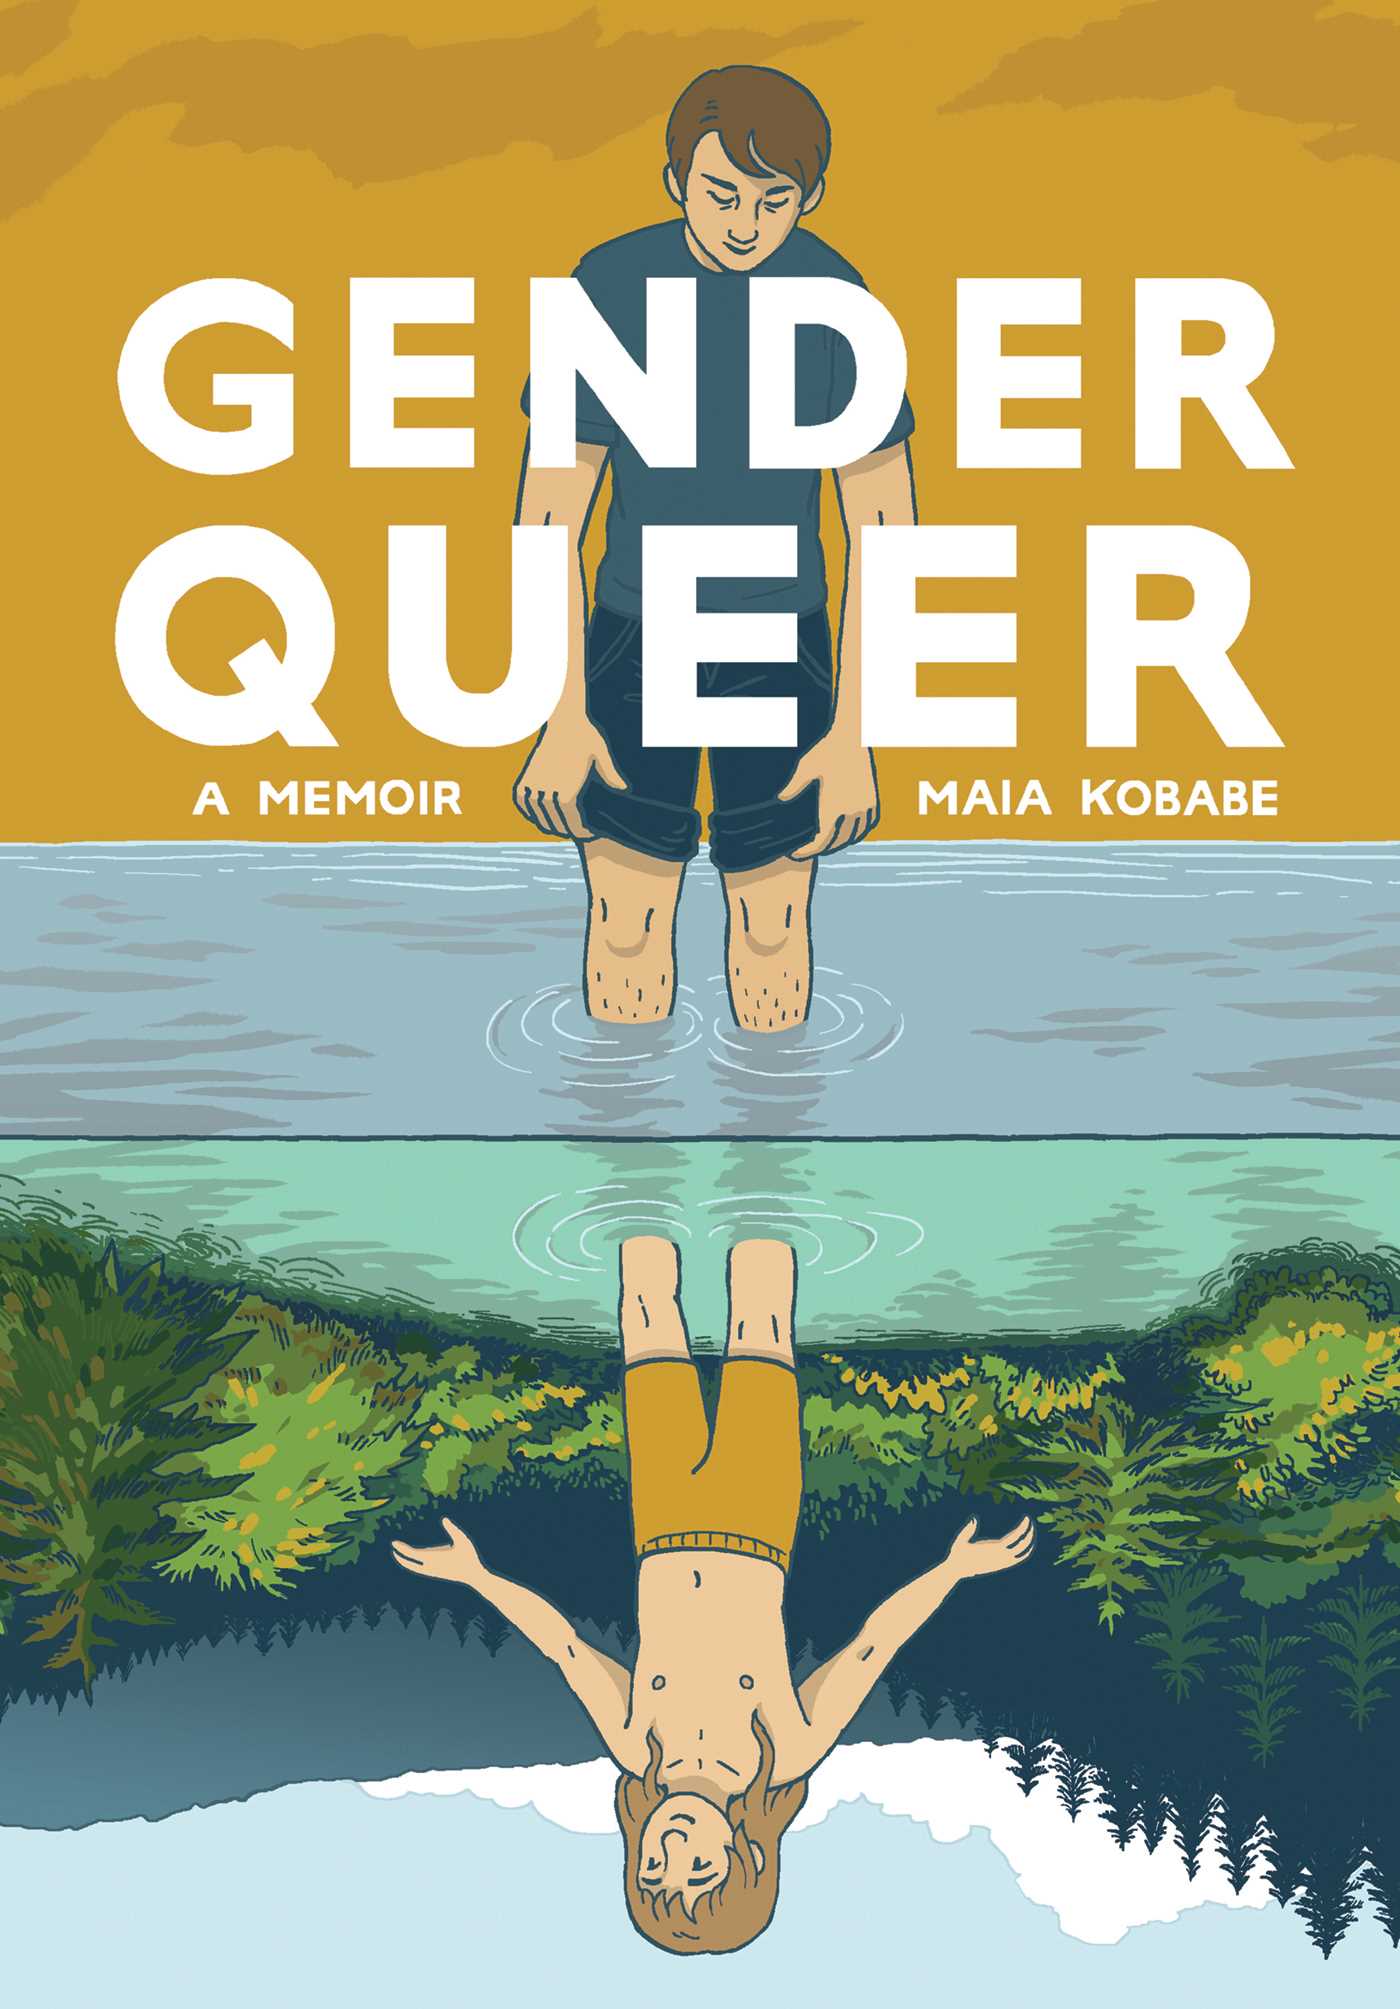 book cover image for Gender Queer by Maia Kolbabe